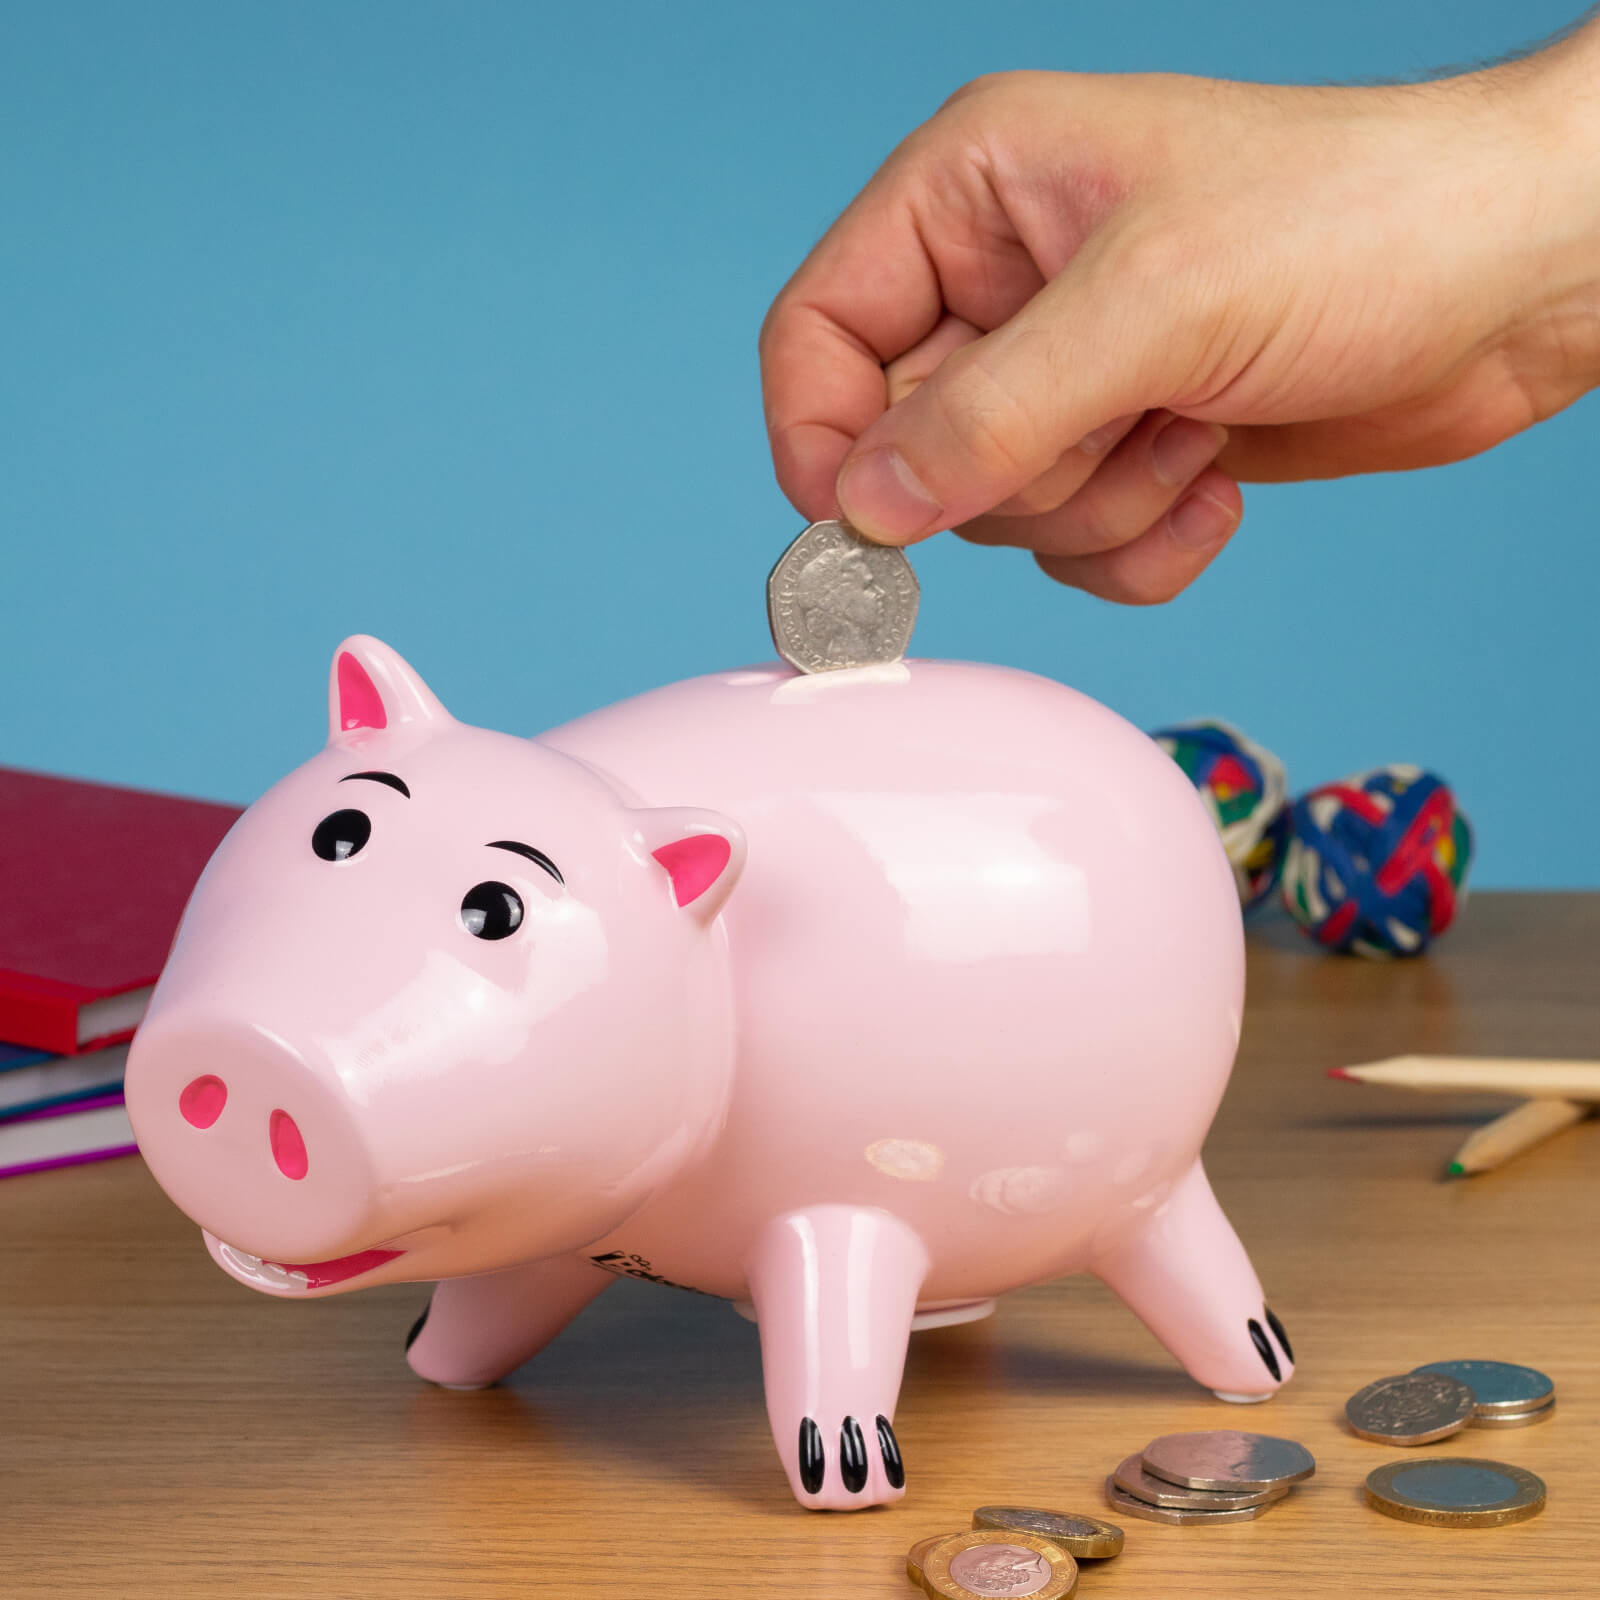 How to save money by building a budget